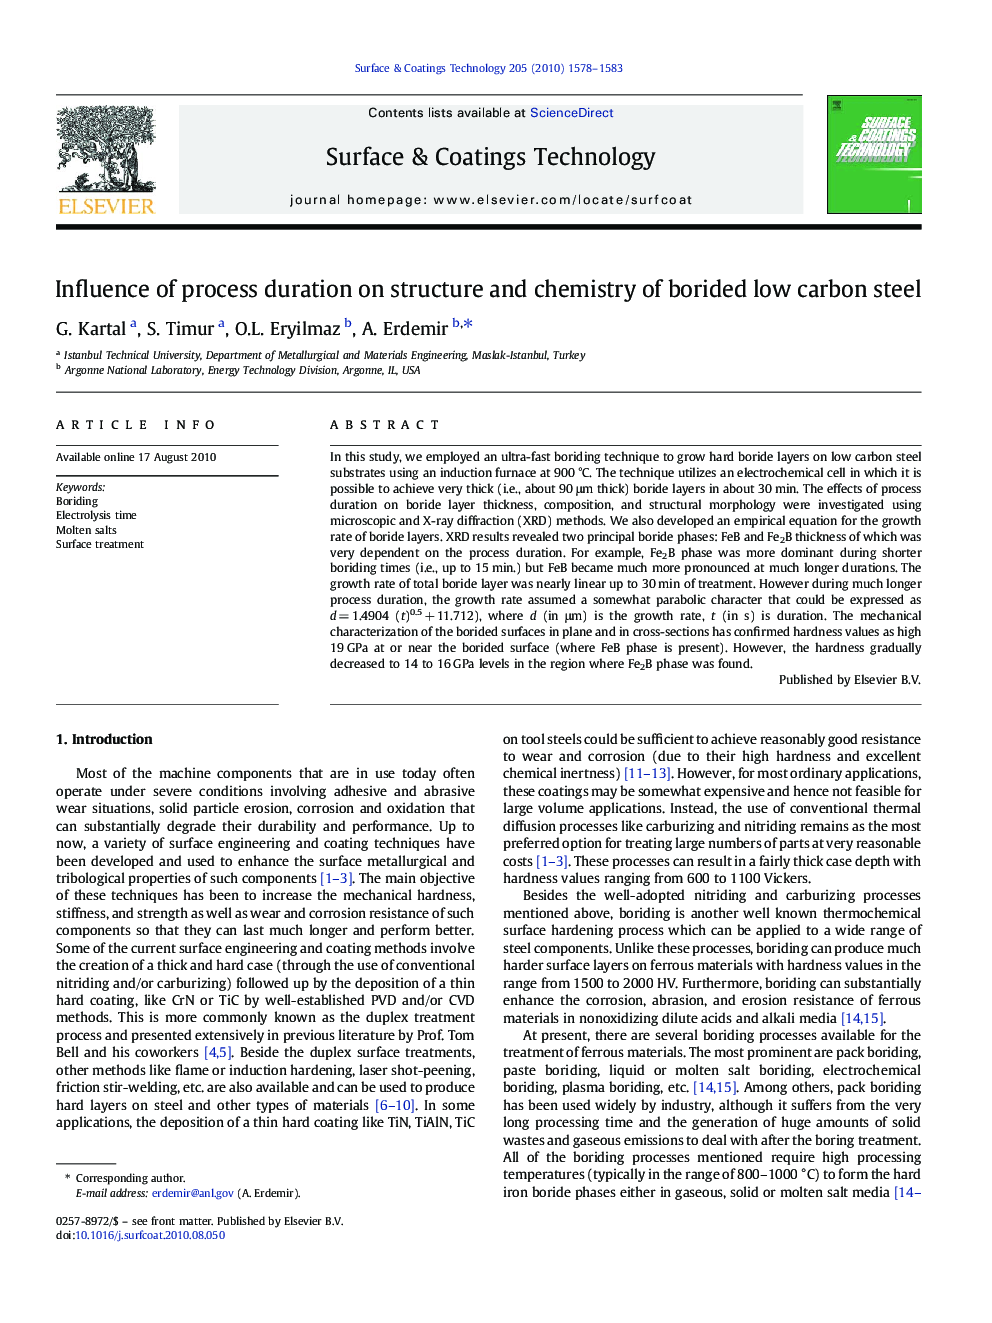 Influence of process duration on structure and chemistry of borided low carbon steel